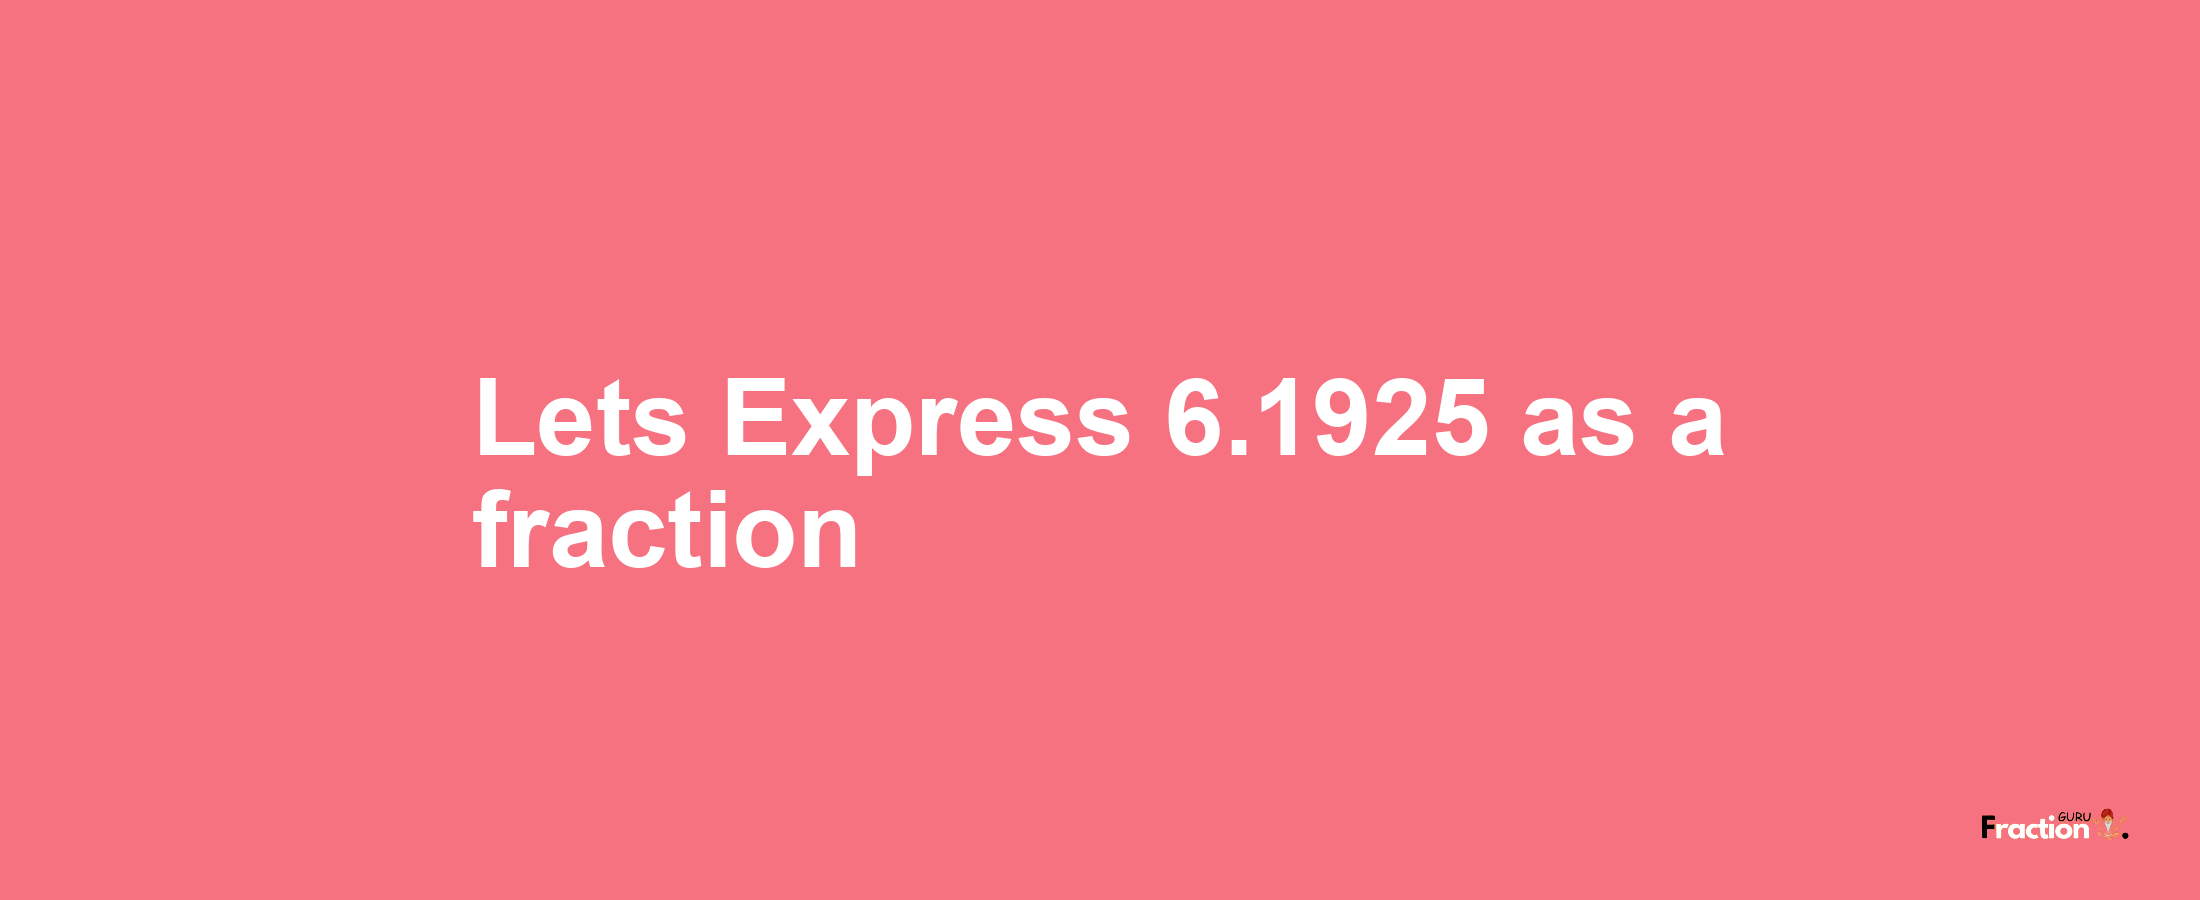 Lets Express 6.1925 as afraction